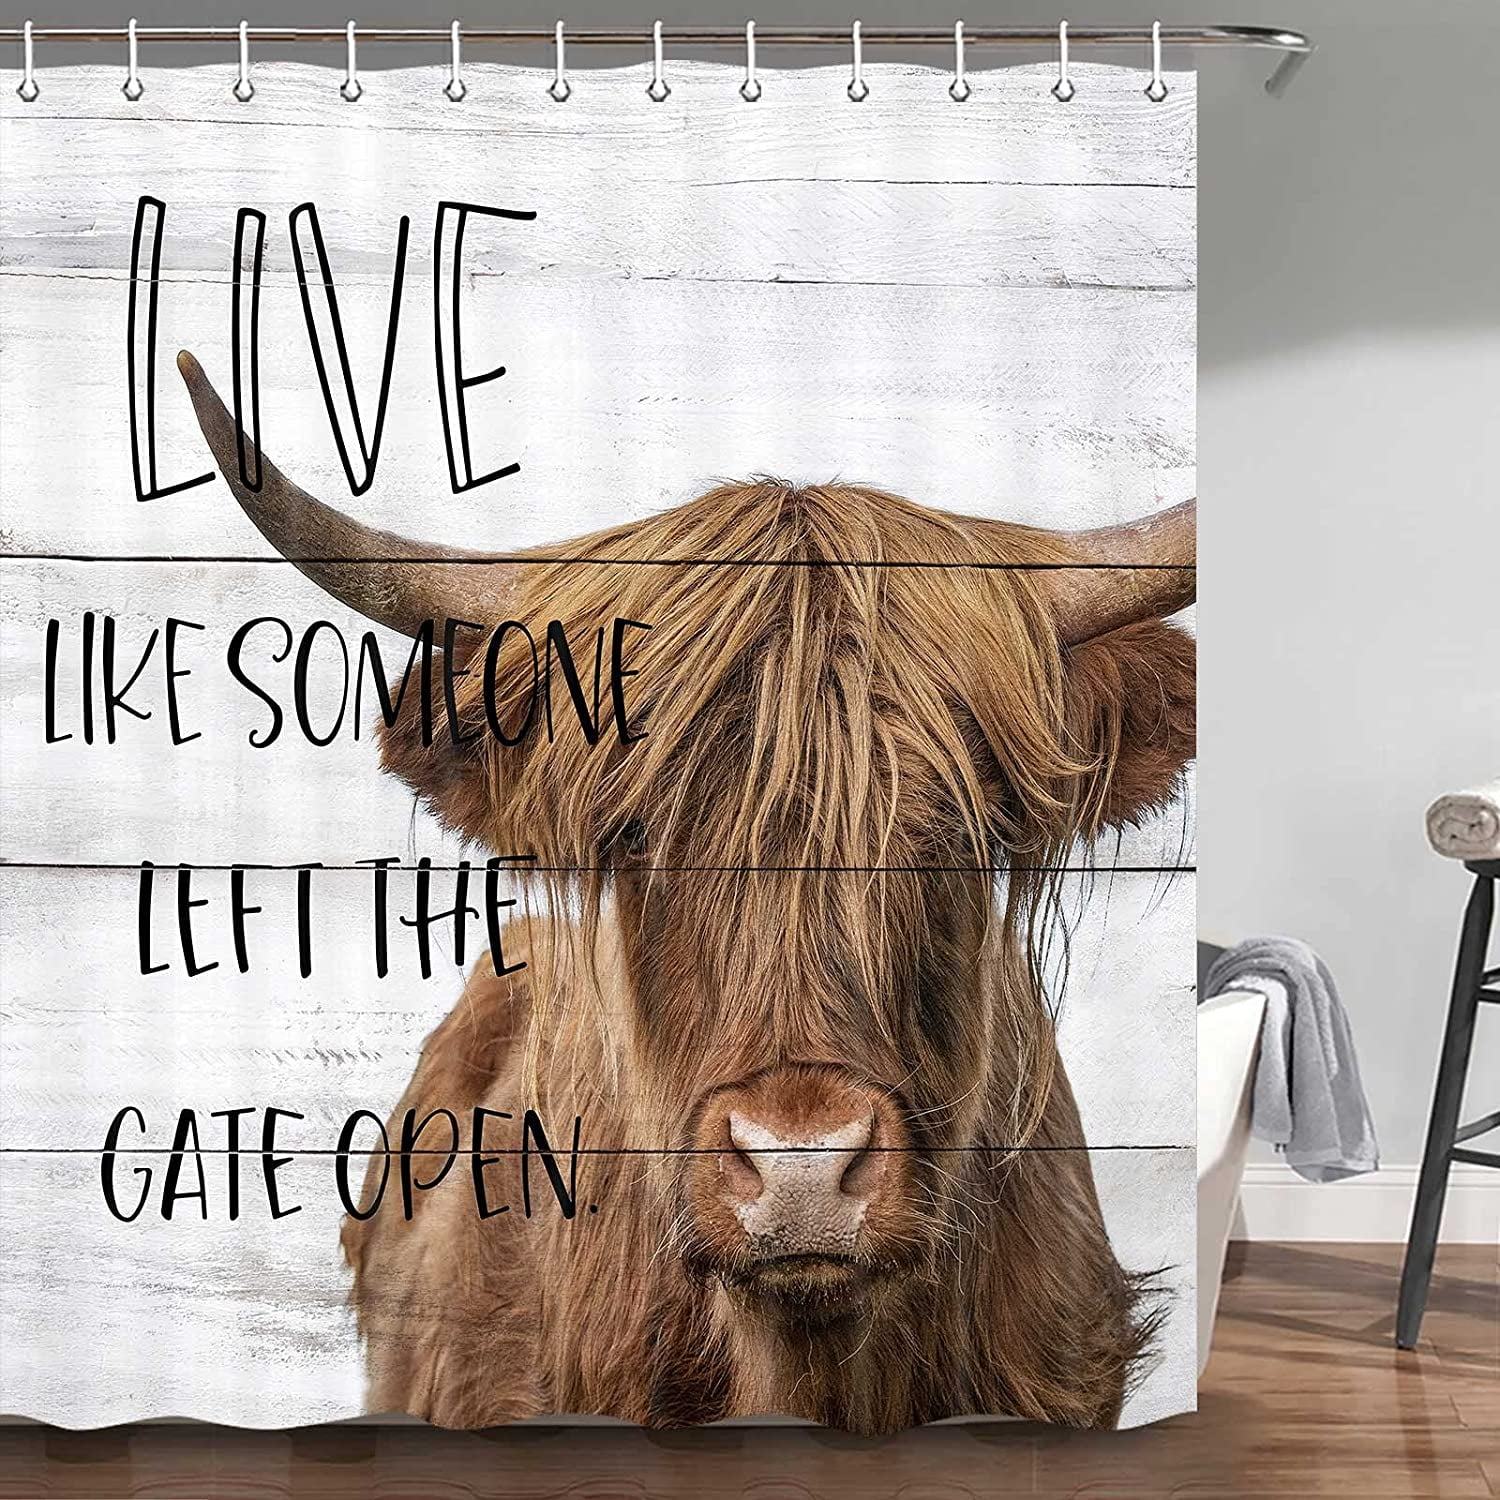 Rustic Wooden Shower Curtain Sets, Cow Shower Curtain Hooks